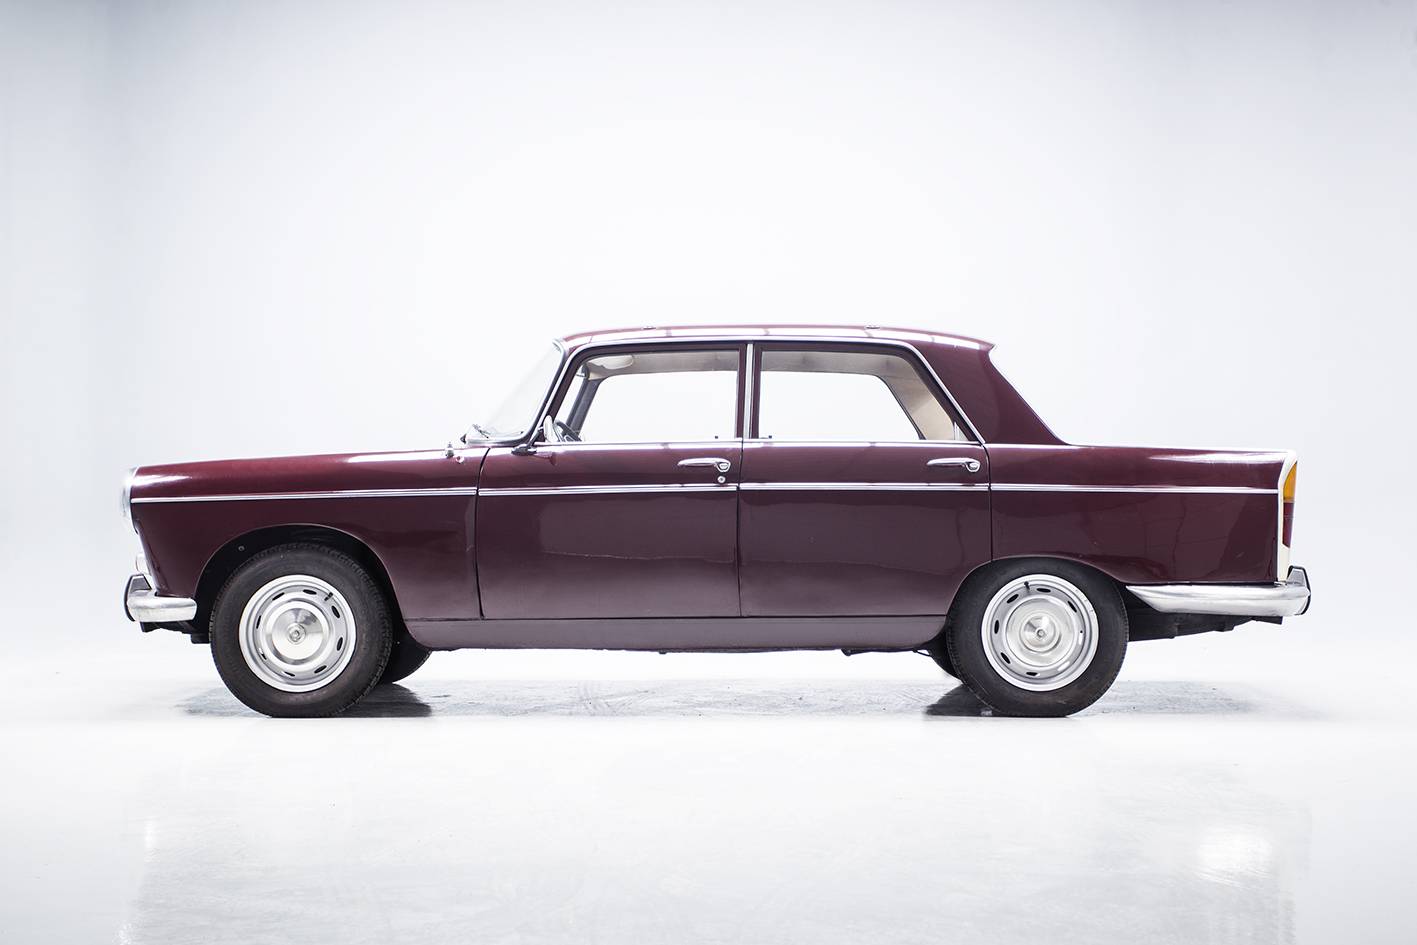 For Sale Peugeot 404 (1969) offered for AUD 11,230